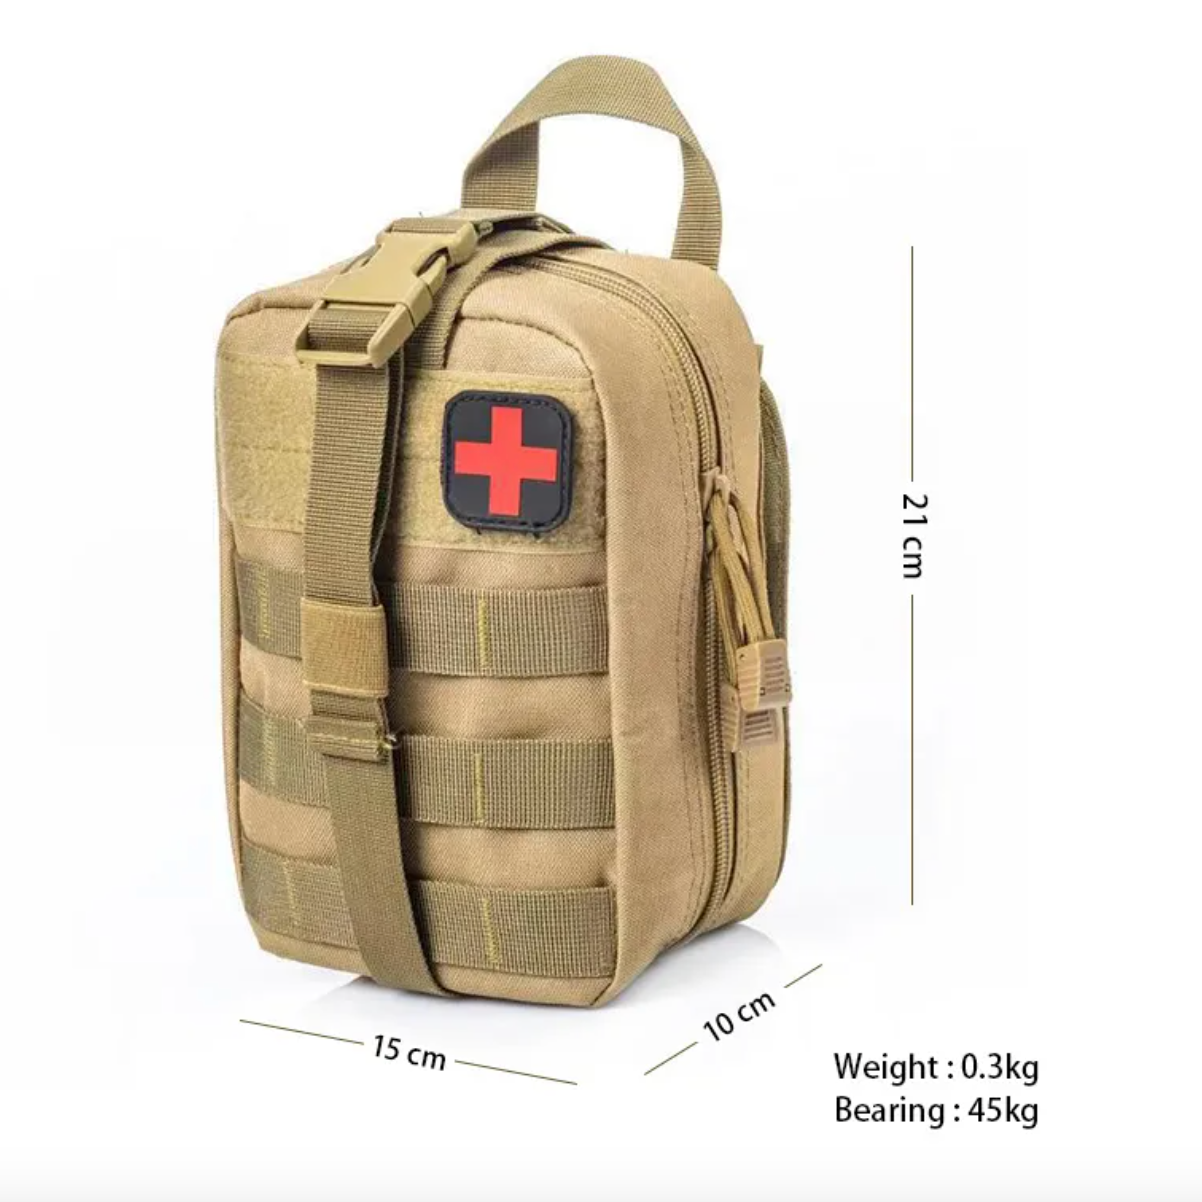 Tactical Medical Accessory Bag with Patch - ACU Camo - RPI Supplies